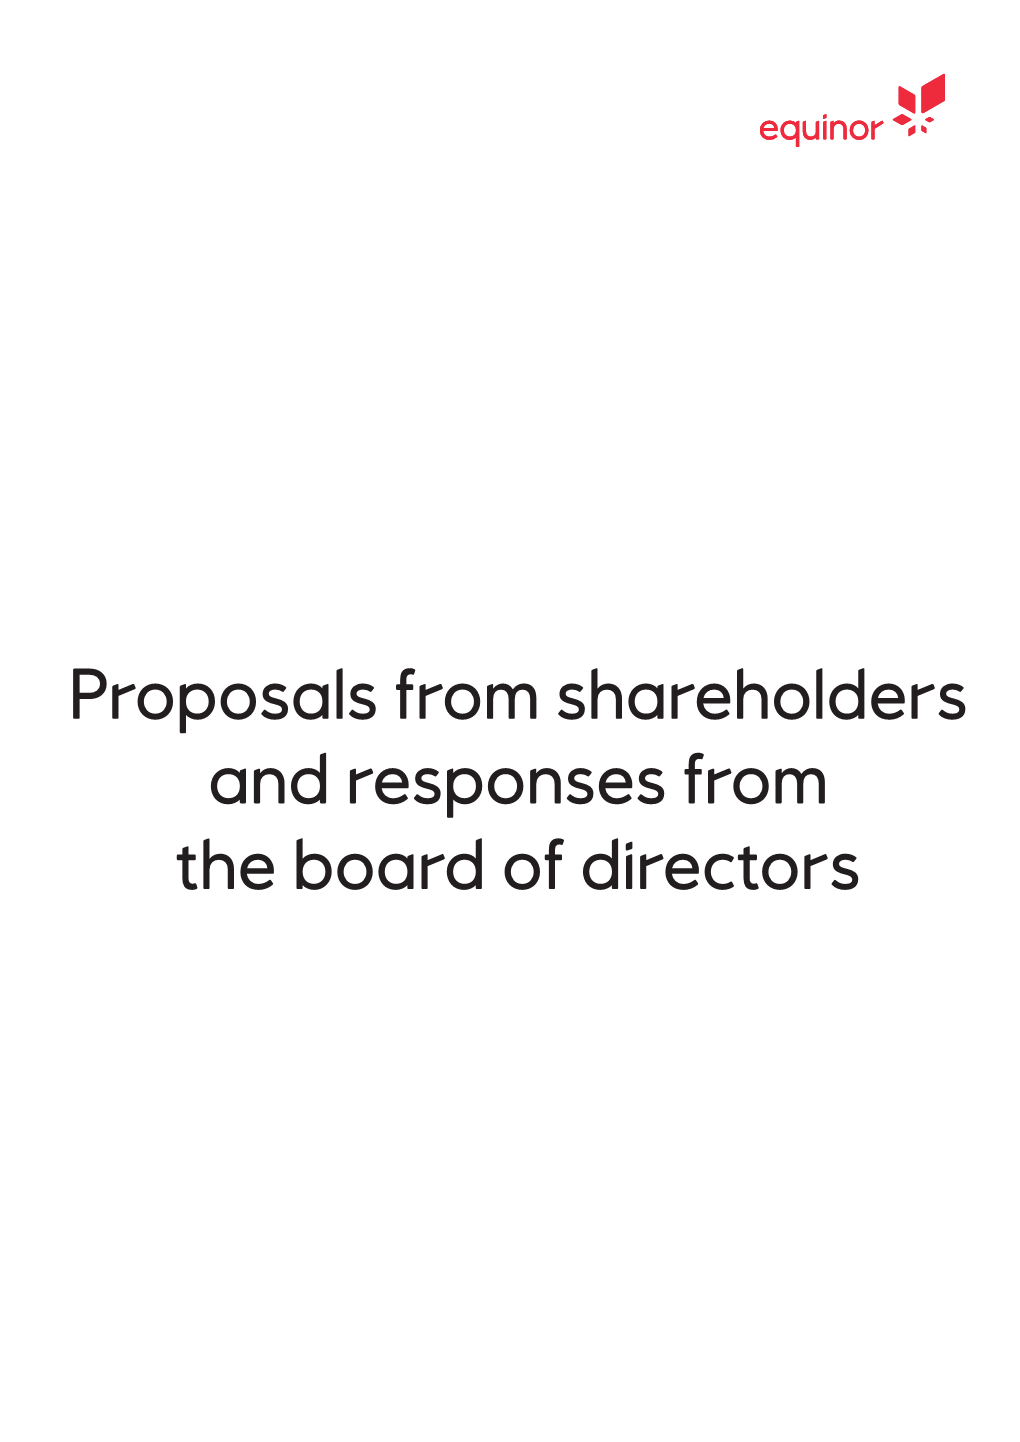 Proposals from Shareholders and Responses from the Board of Directors SHAREHOLDER PROPOSALS for EQUINOR ASA’S ANNUAL GENERAL MEETING 11 MAY 2021